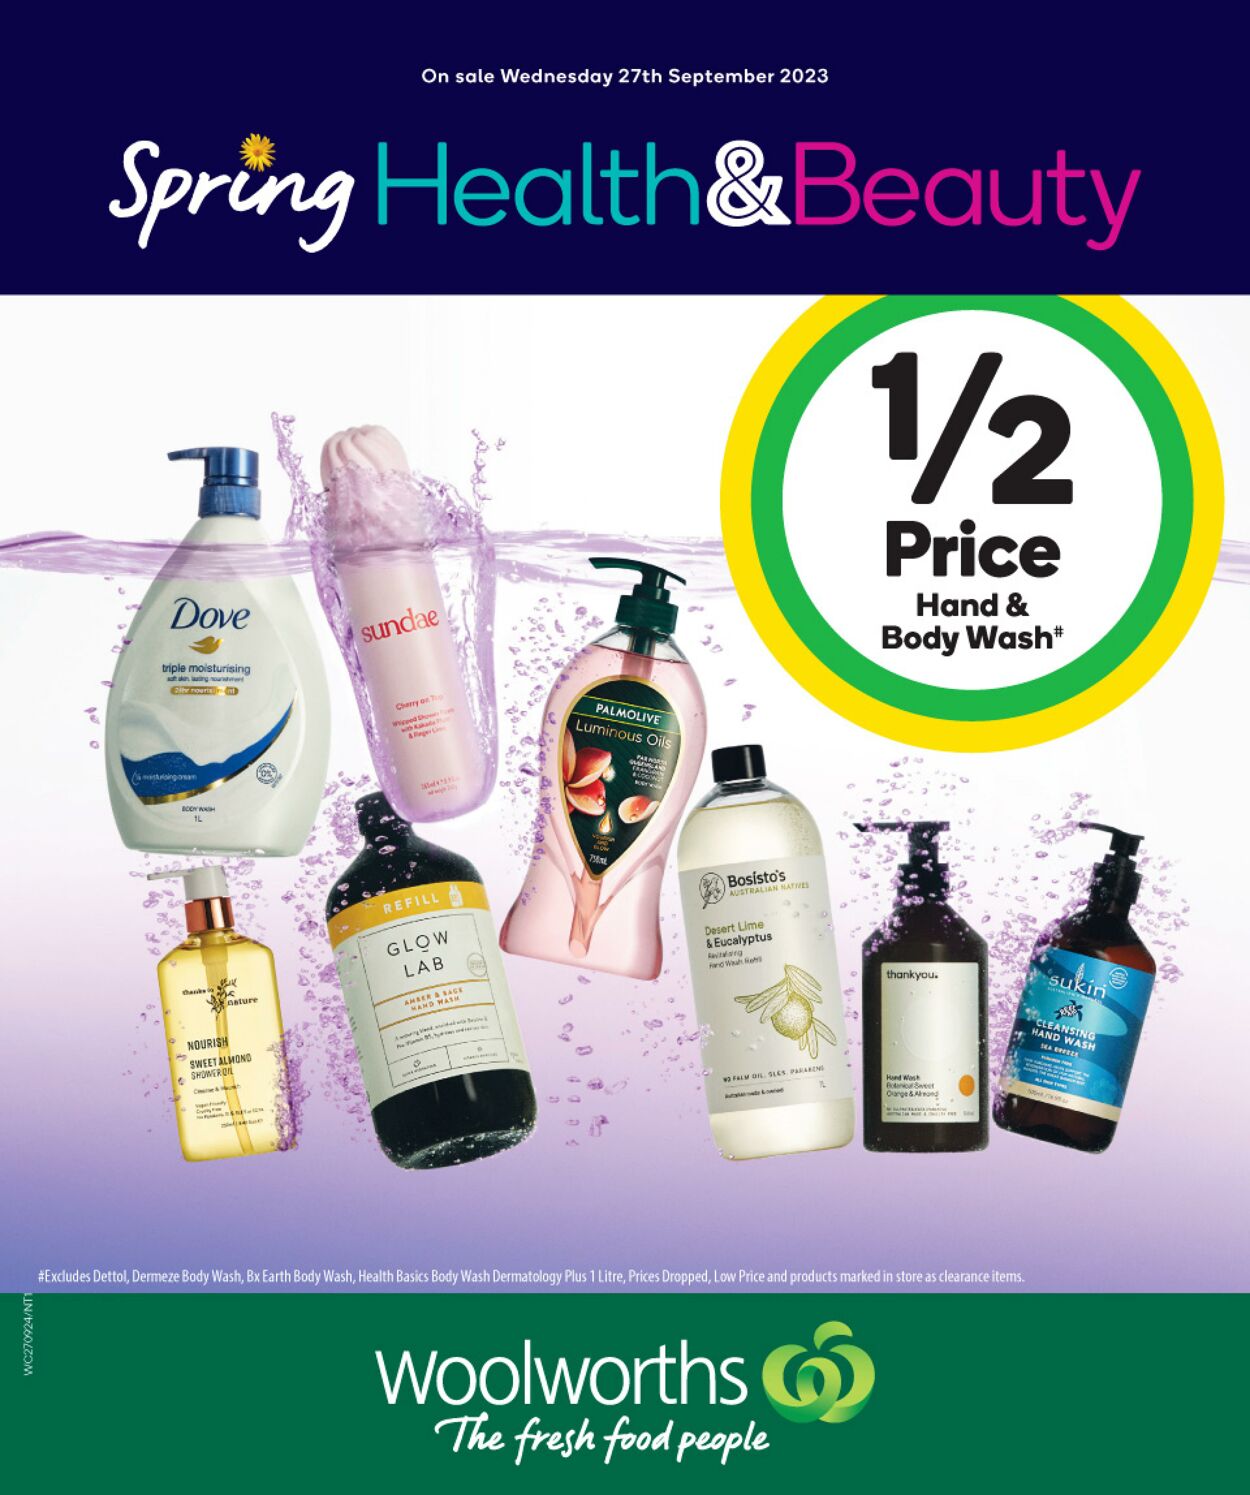 Catalogue Woolworths - Spring Health & Beauty NT 27 Sep, 2023 - 3 Oct, 2023